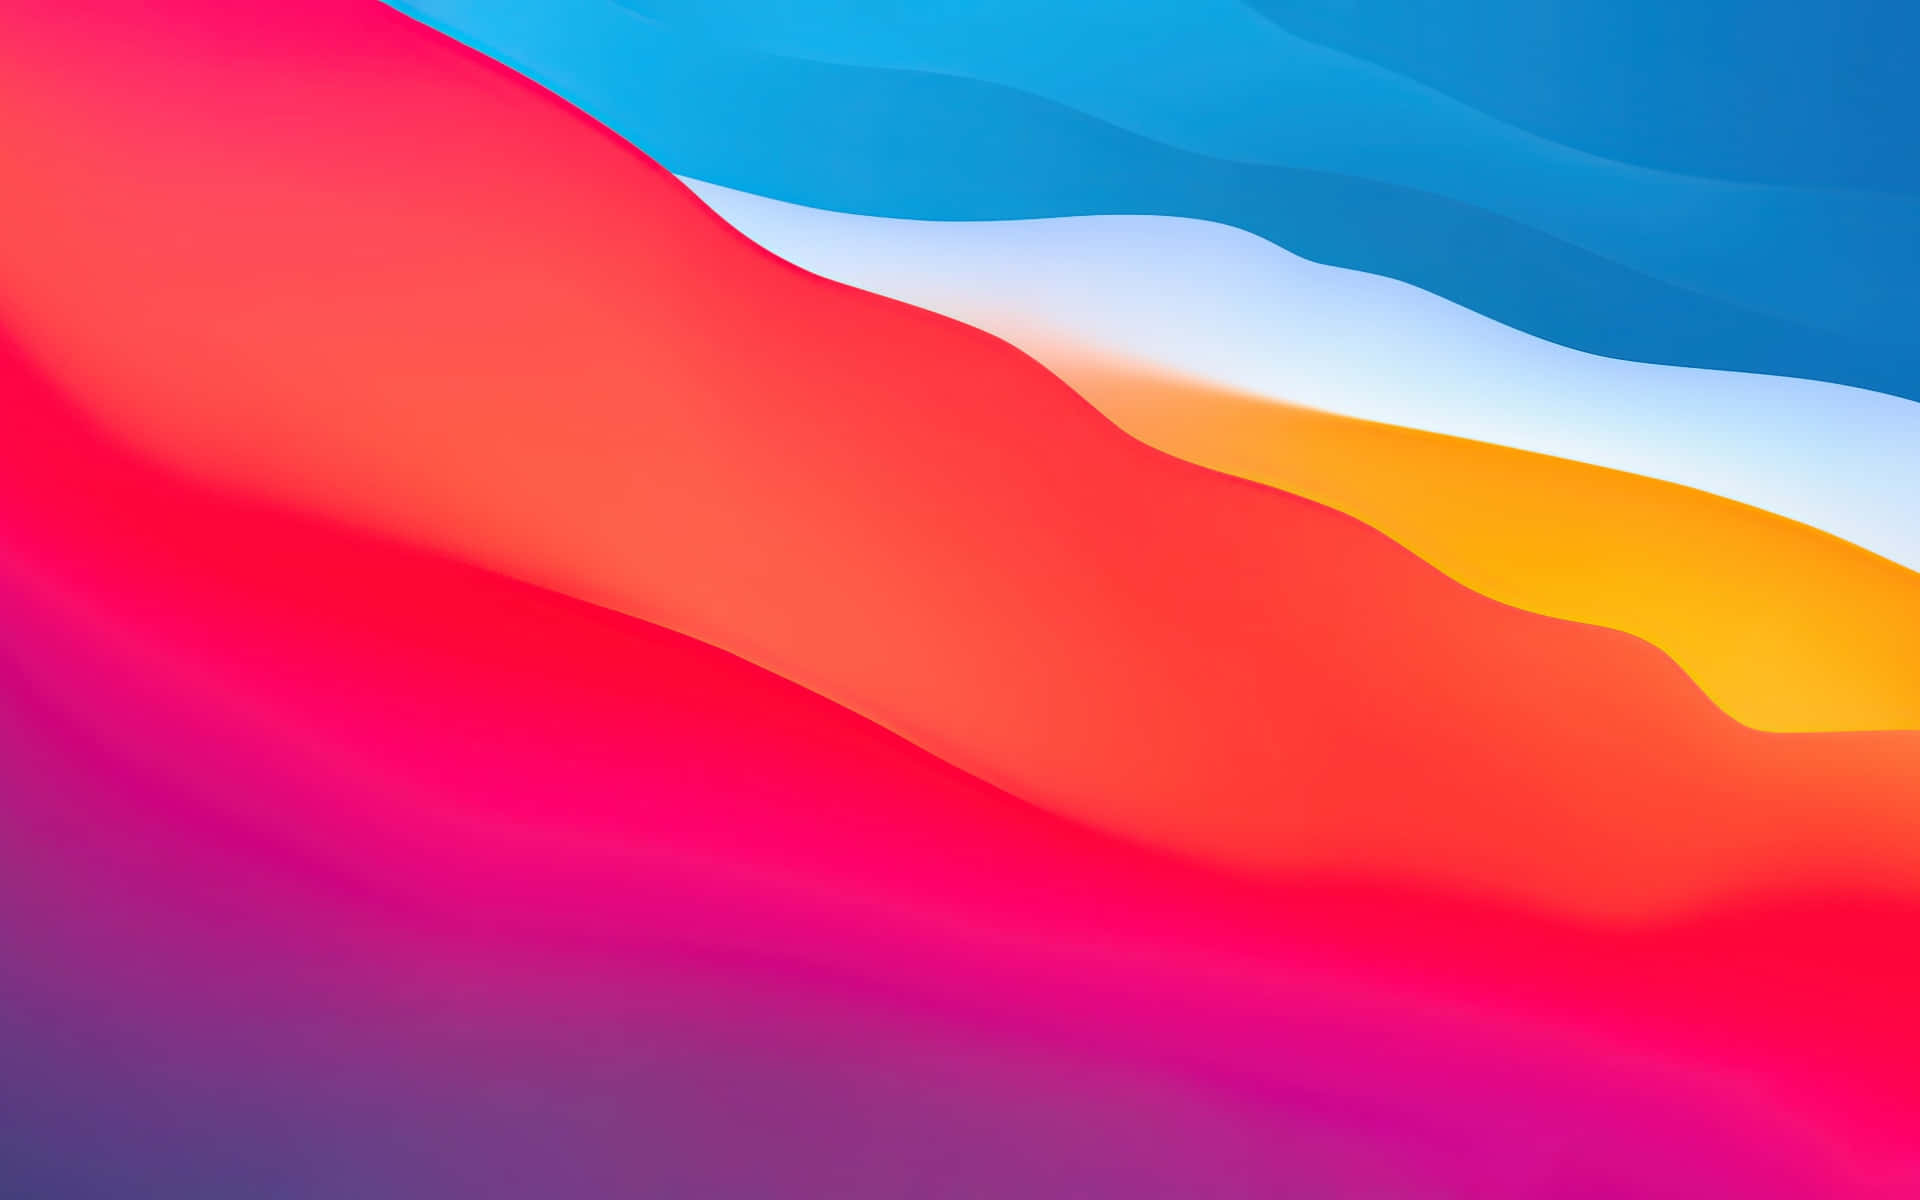 Let your style shine with a colorful phone Wallpaper